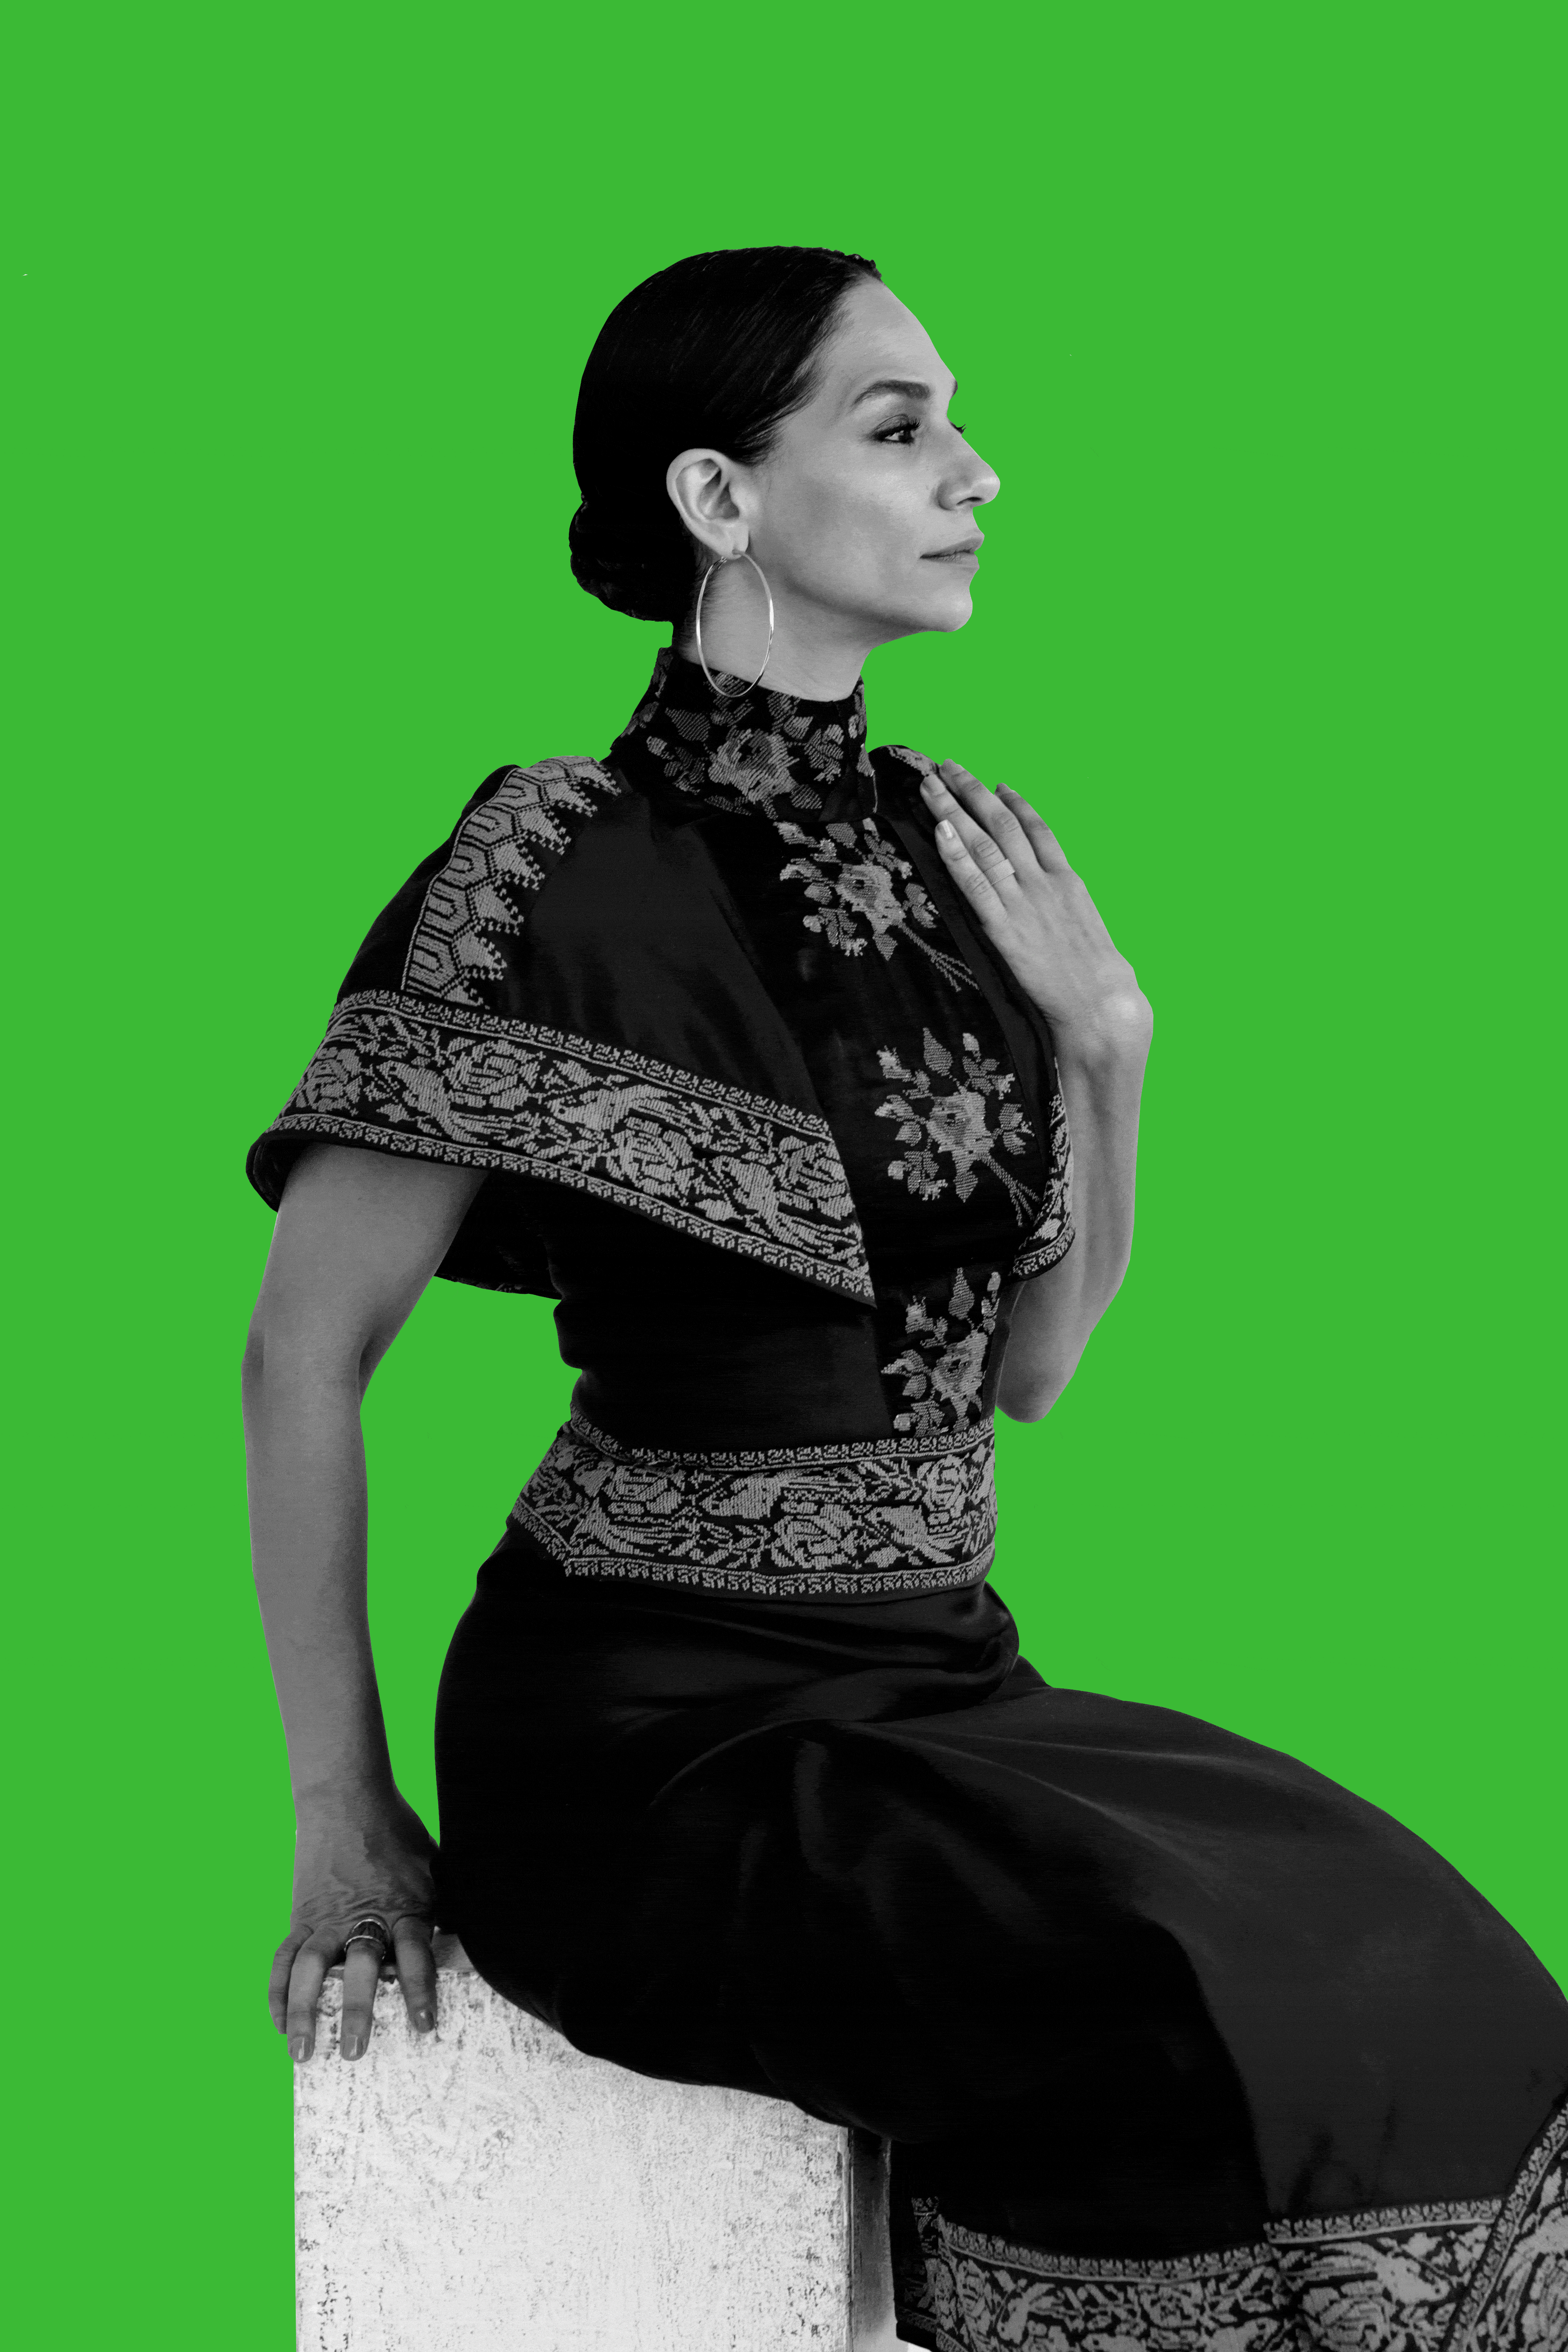 Noura Erakat sits on a white pedestal and faces right. She wears a traditional Palestinian dress with intricate embroidery and flutter sleeves and hoop earrings. The background alternates between neon pink and green, while Noura appears filtered in black and white.